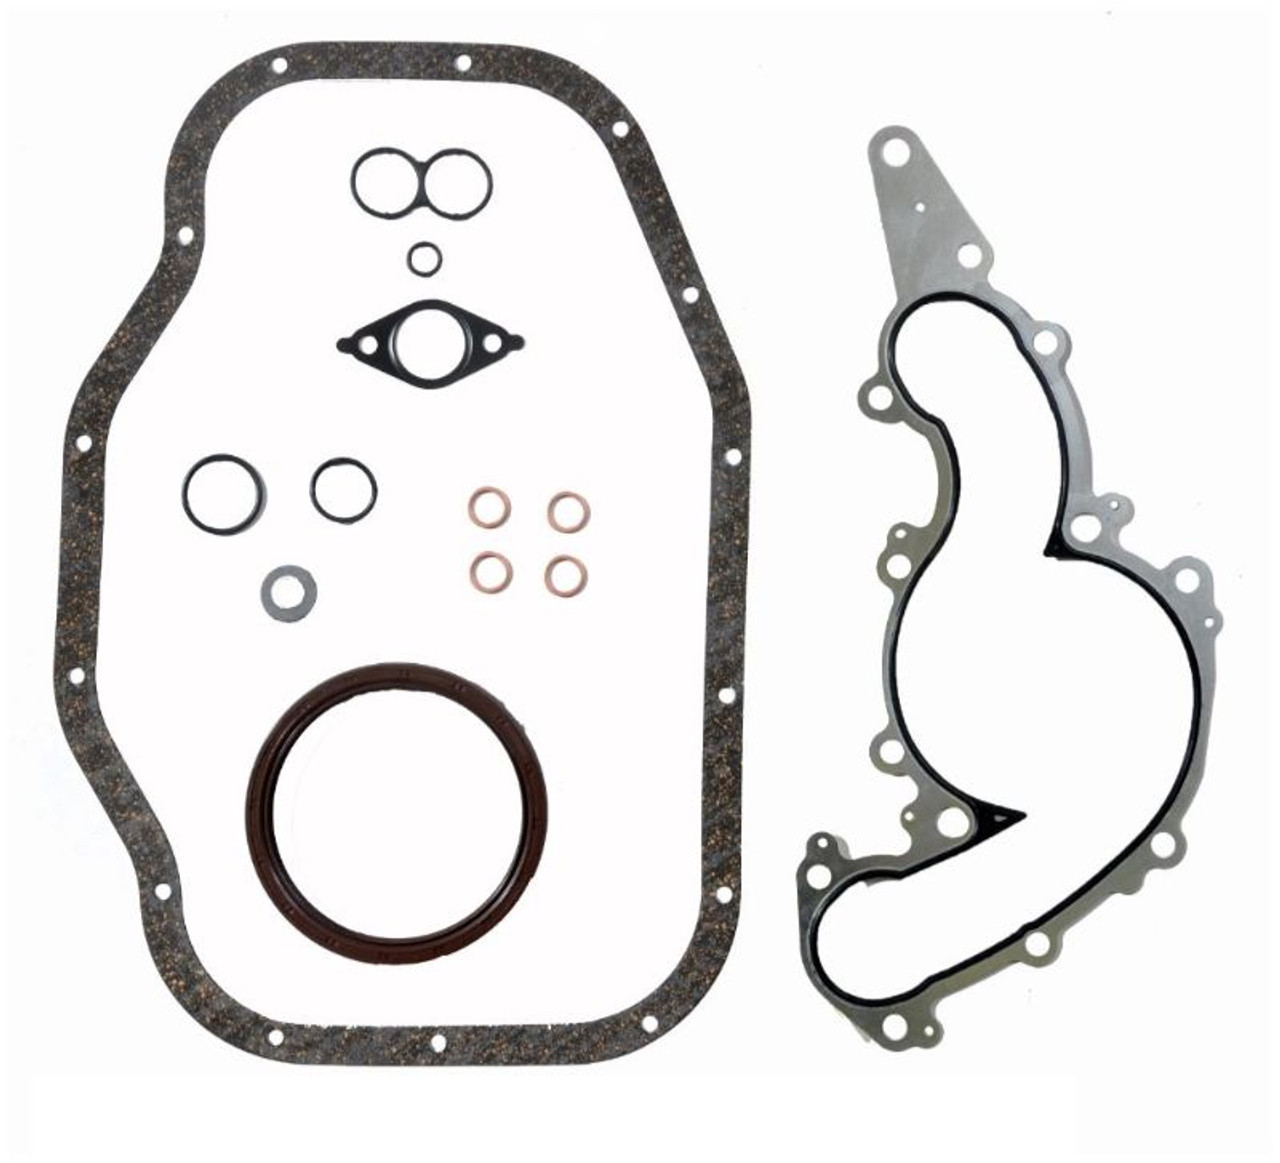 2005 Toyota Sequoia 4.7L Engine Lower Gasket Set TO4.7CS-A -32